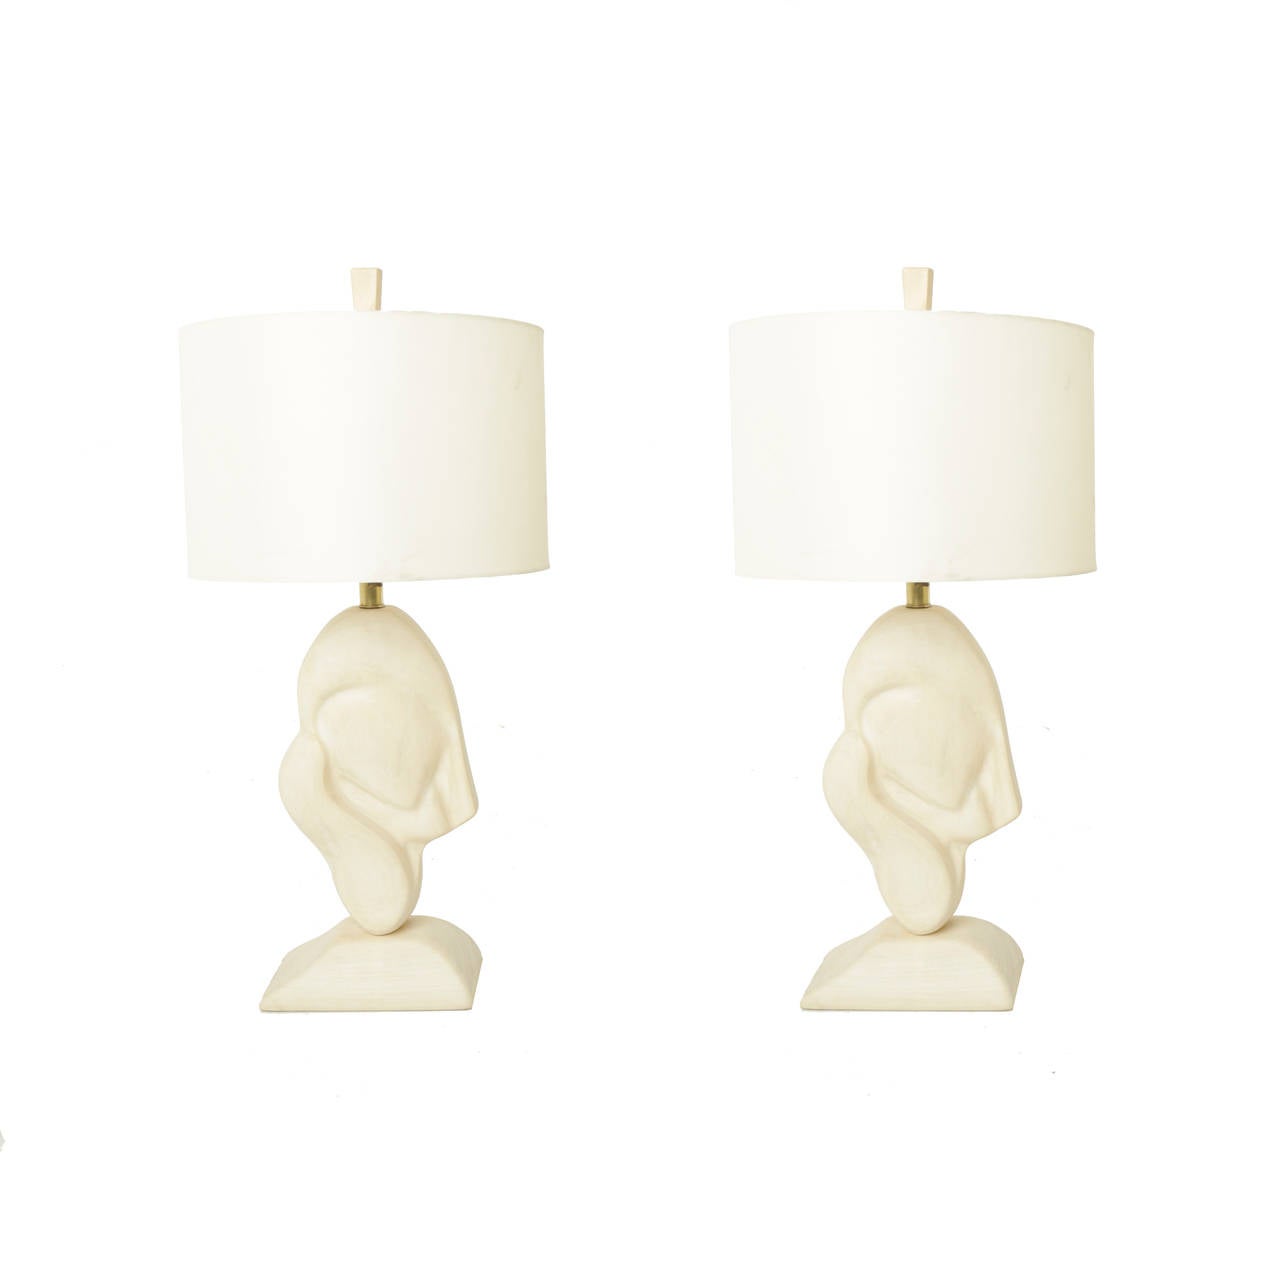 A pair of lovely sculptural solid wood table lamps. 

Shades are not included.

Many pieces are stored in our warehouse, so please click on “Contact Dealer” button under our logo below to find out if the pieces you are interested in seeing are